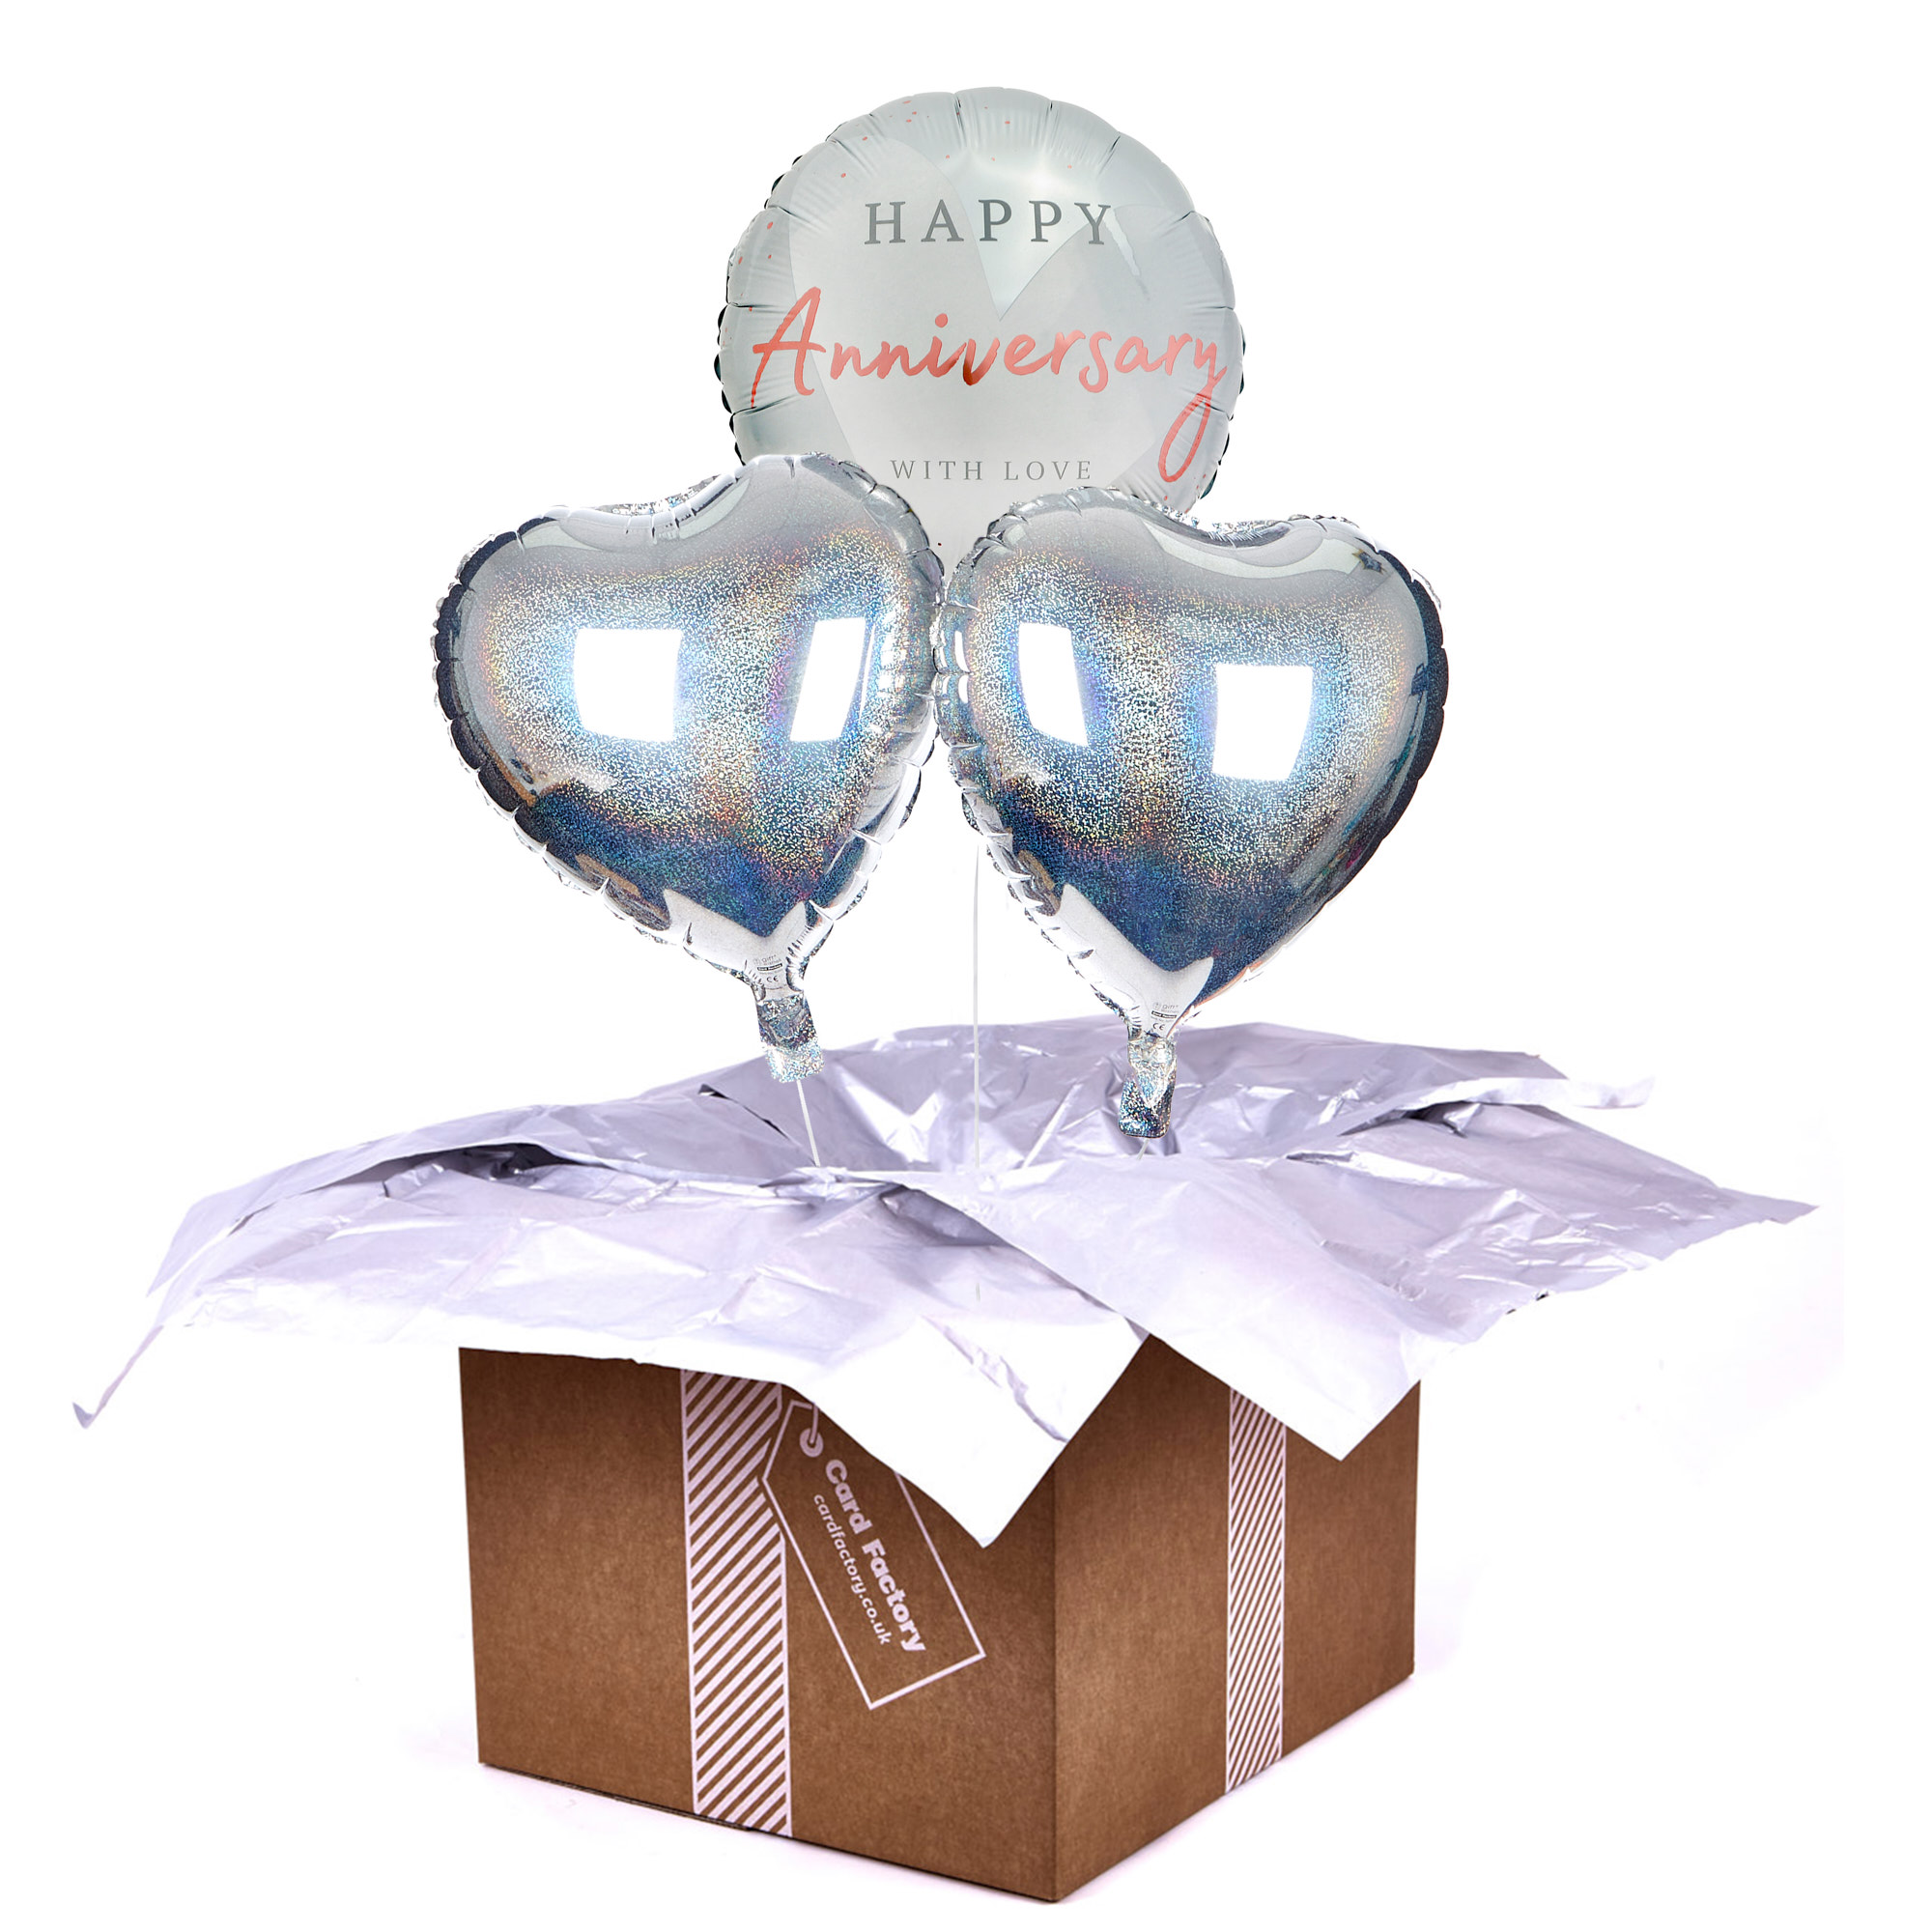 With Love Happy Anniversary Balloon Bouquet - DELIVERED INFLATED!